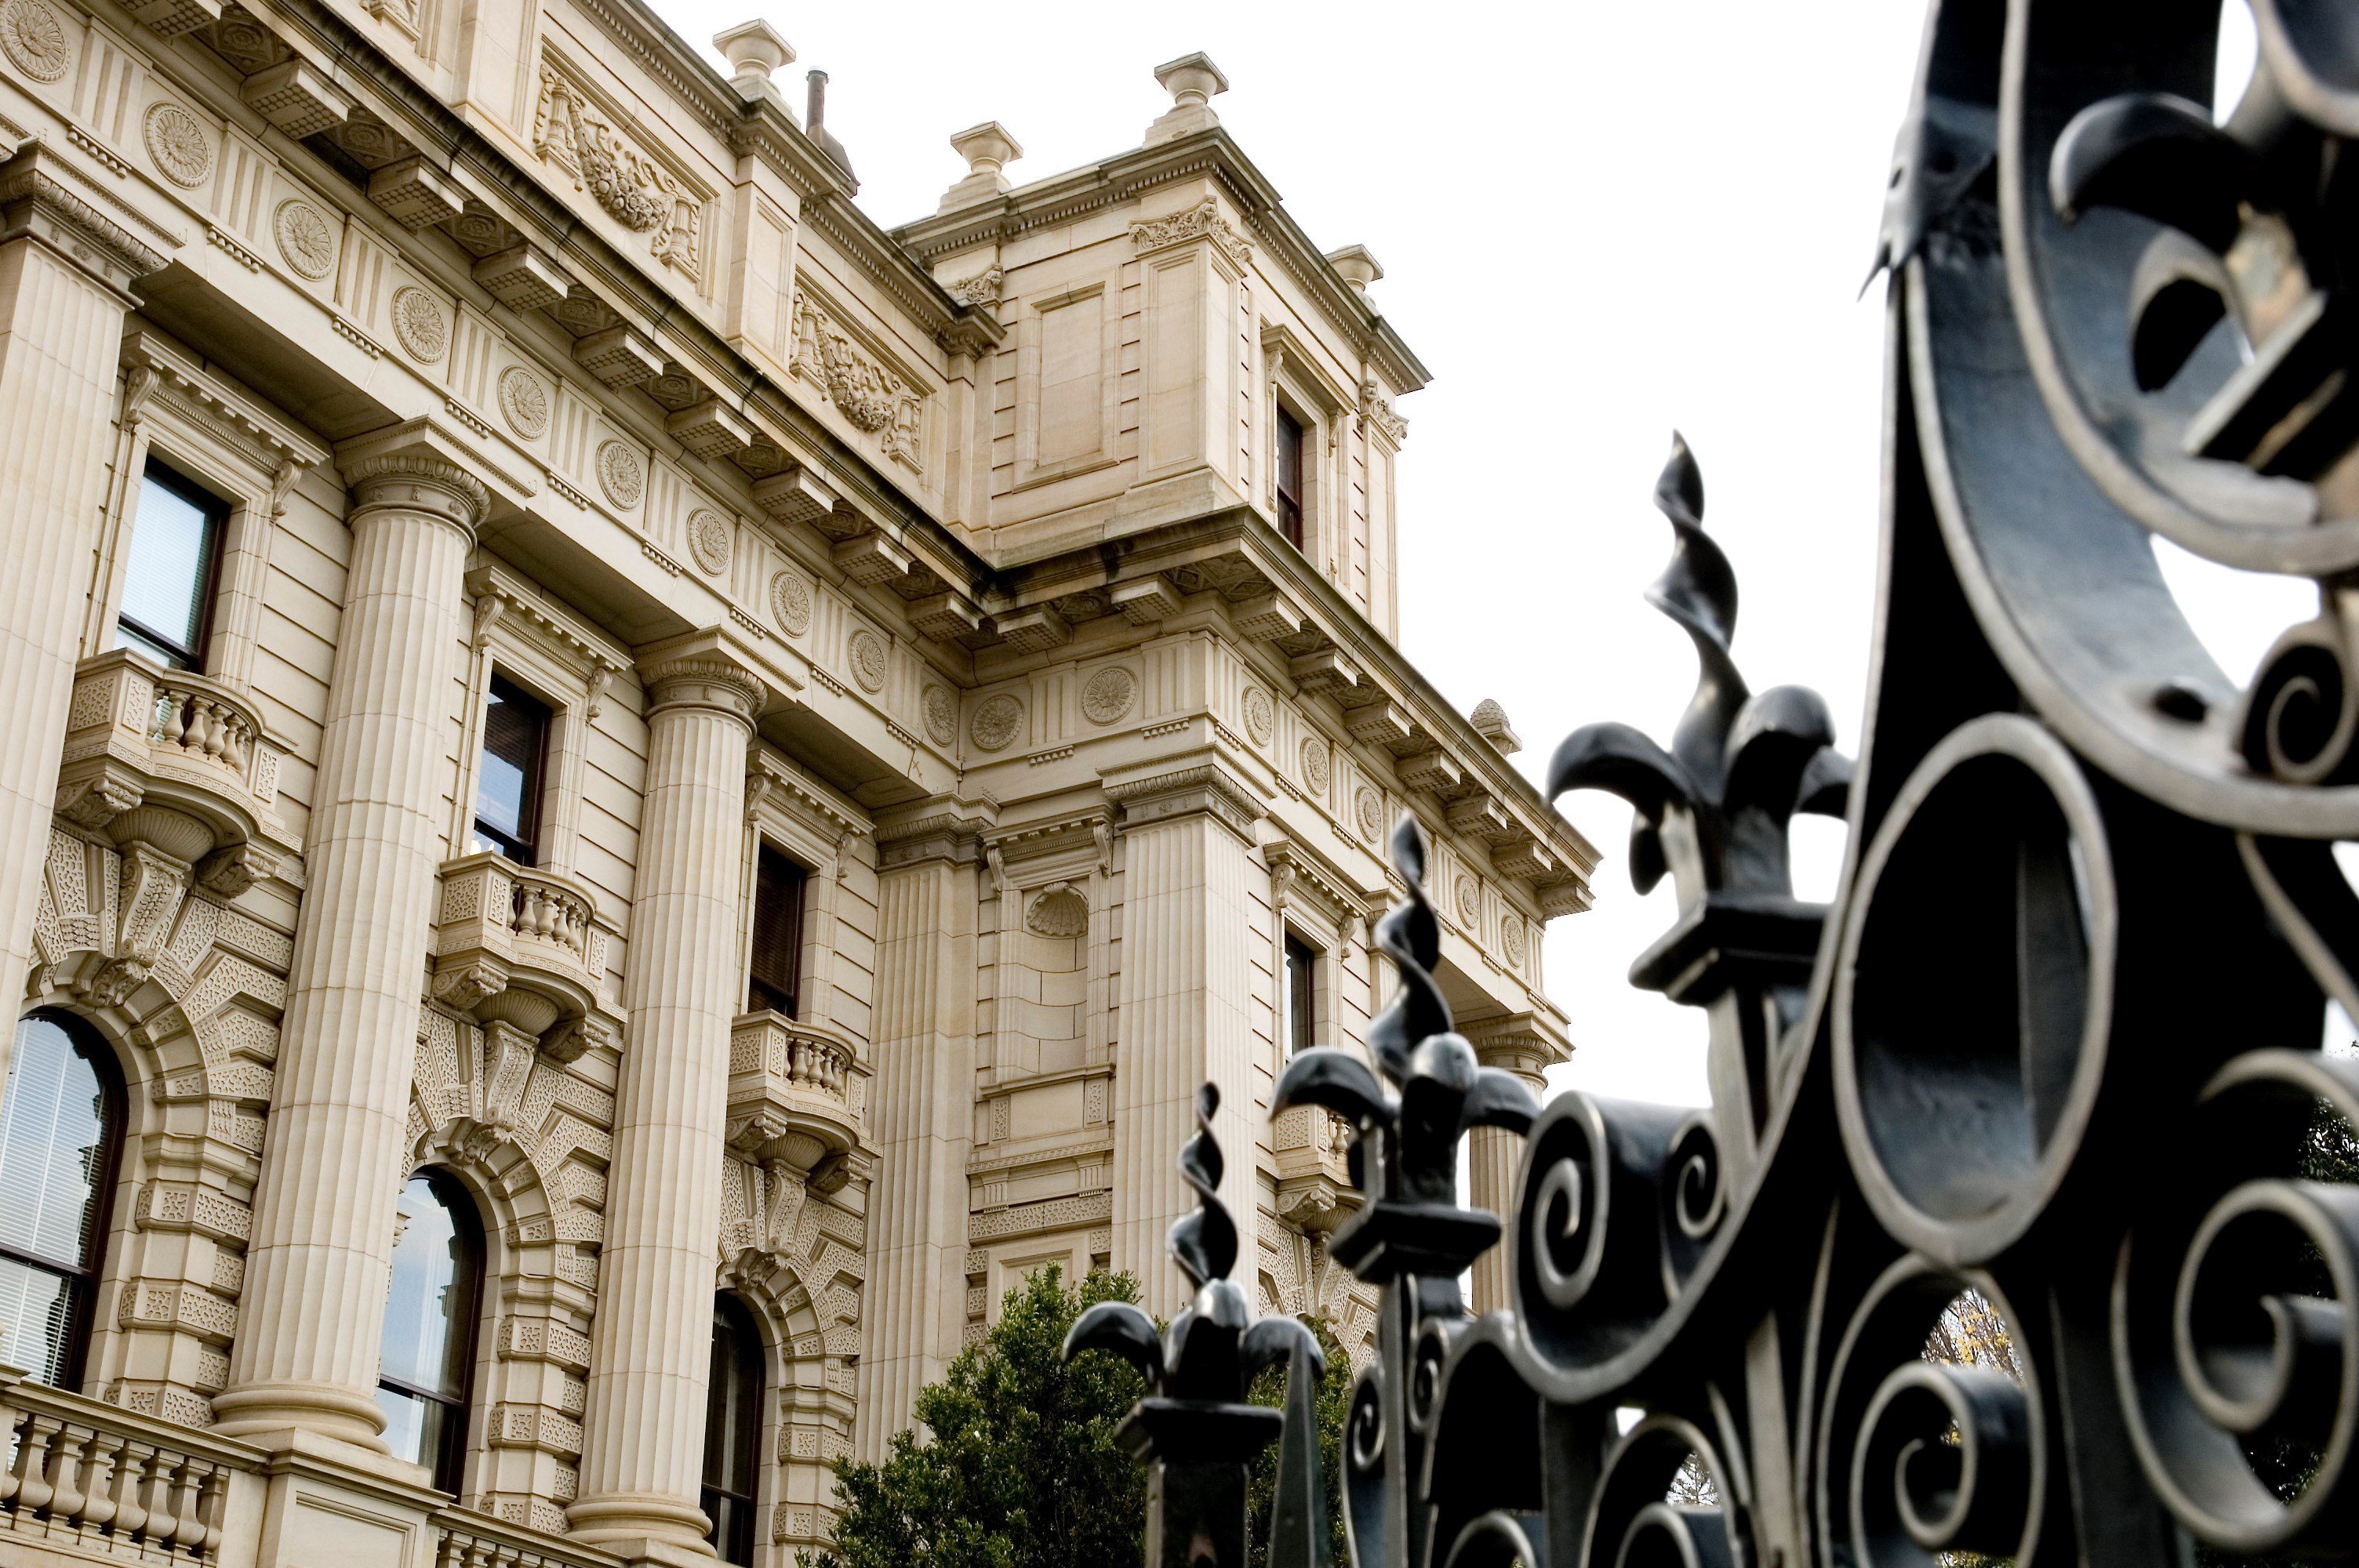 Victoria's Parliament House is one of Australia's oldest and most distinguished public buildings. 